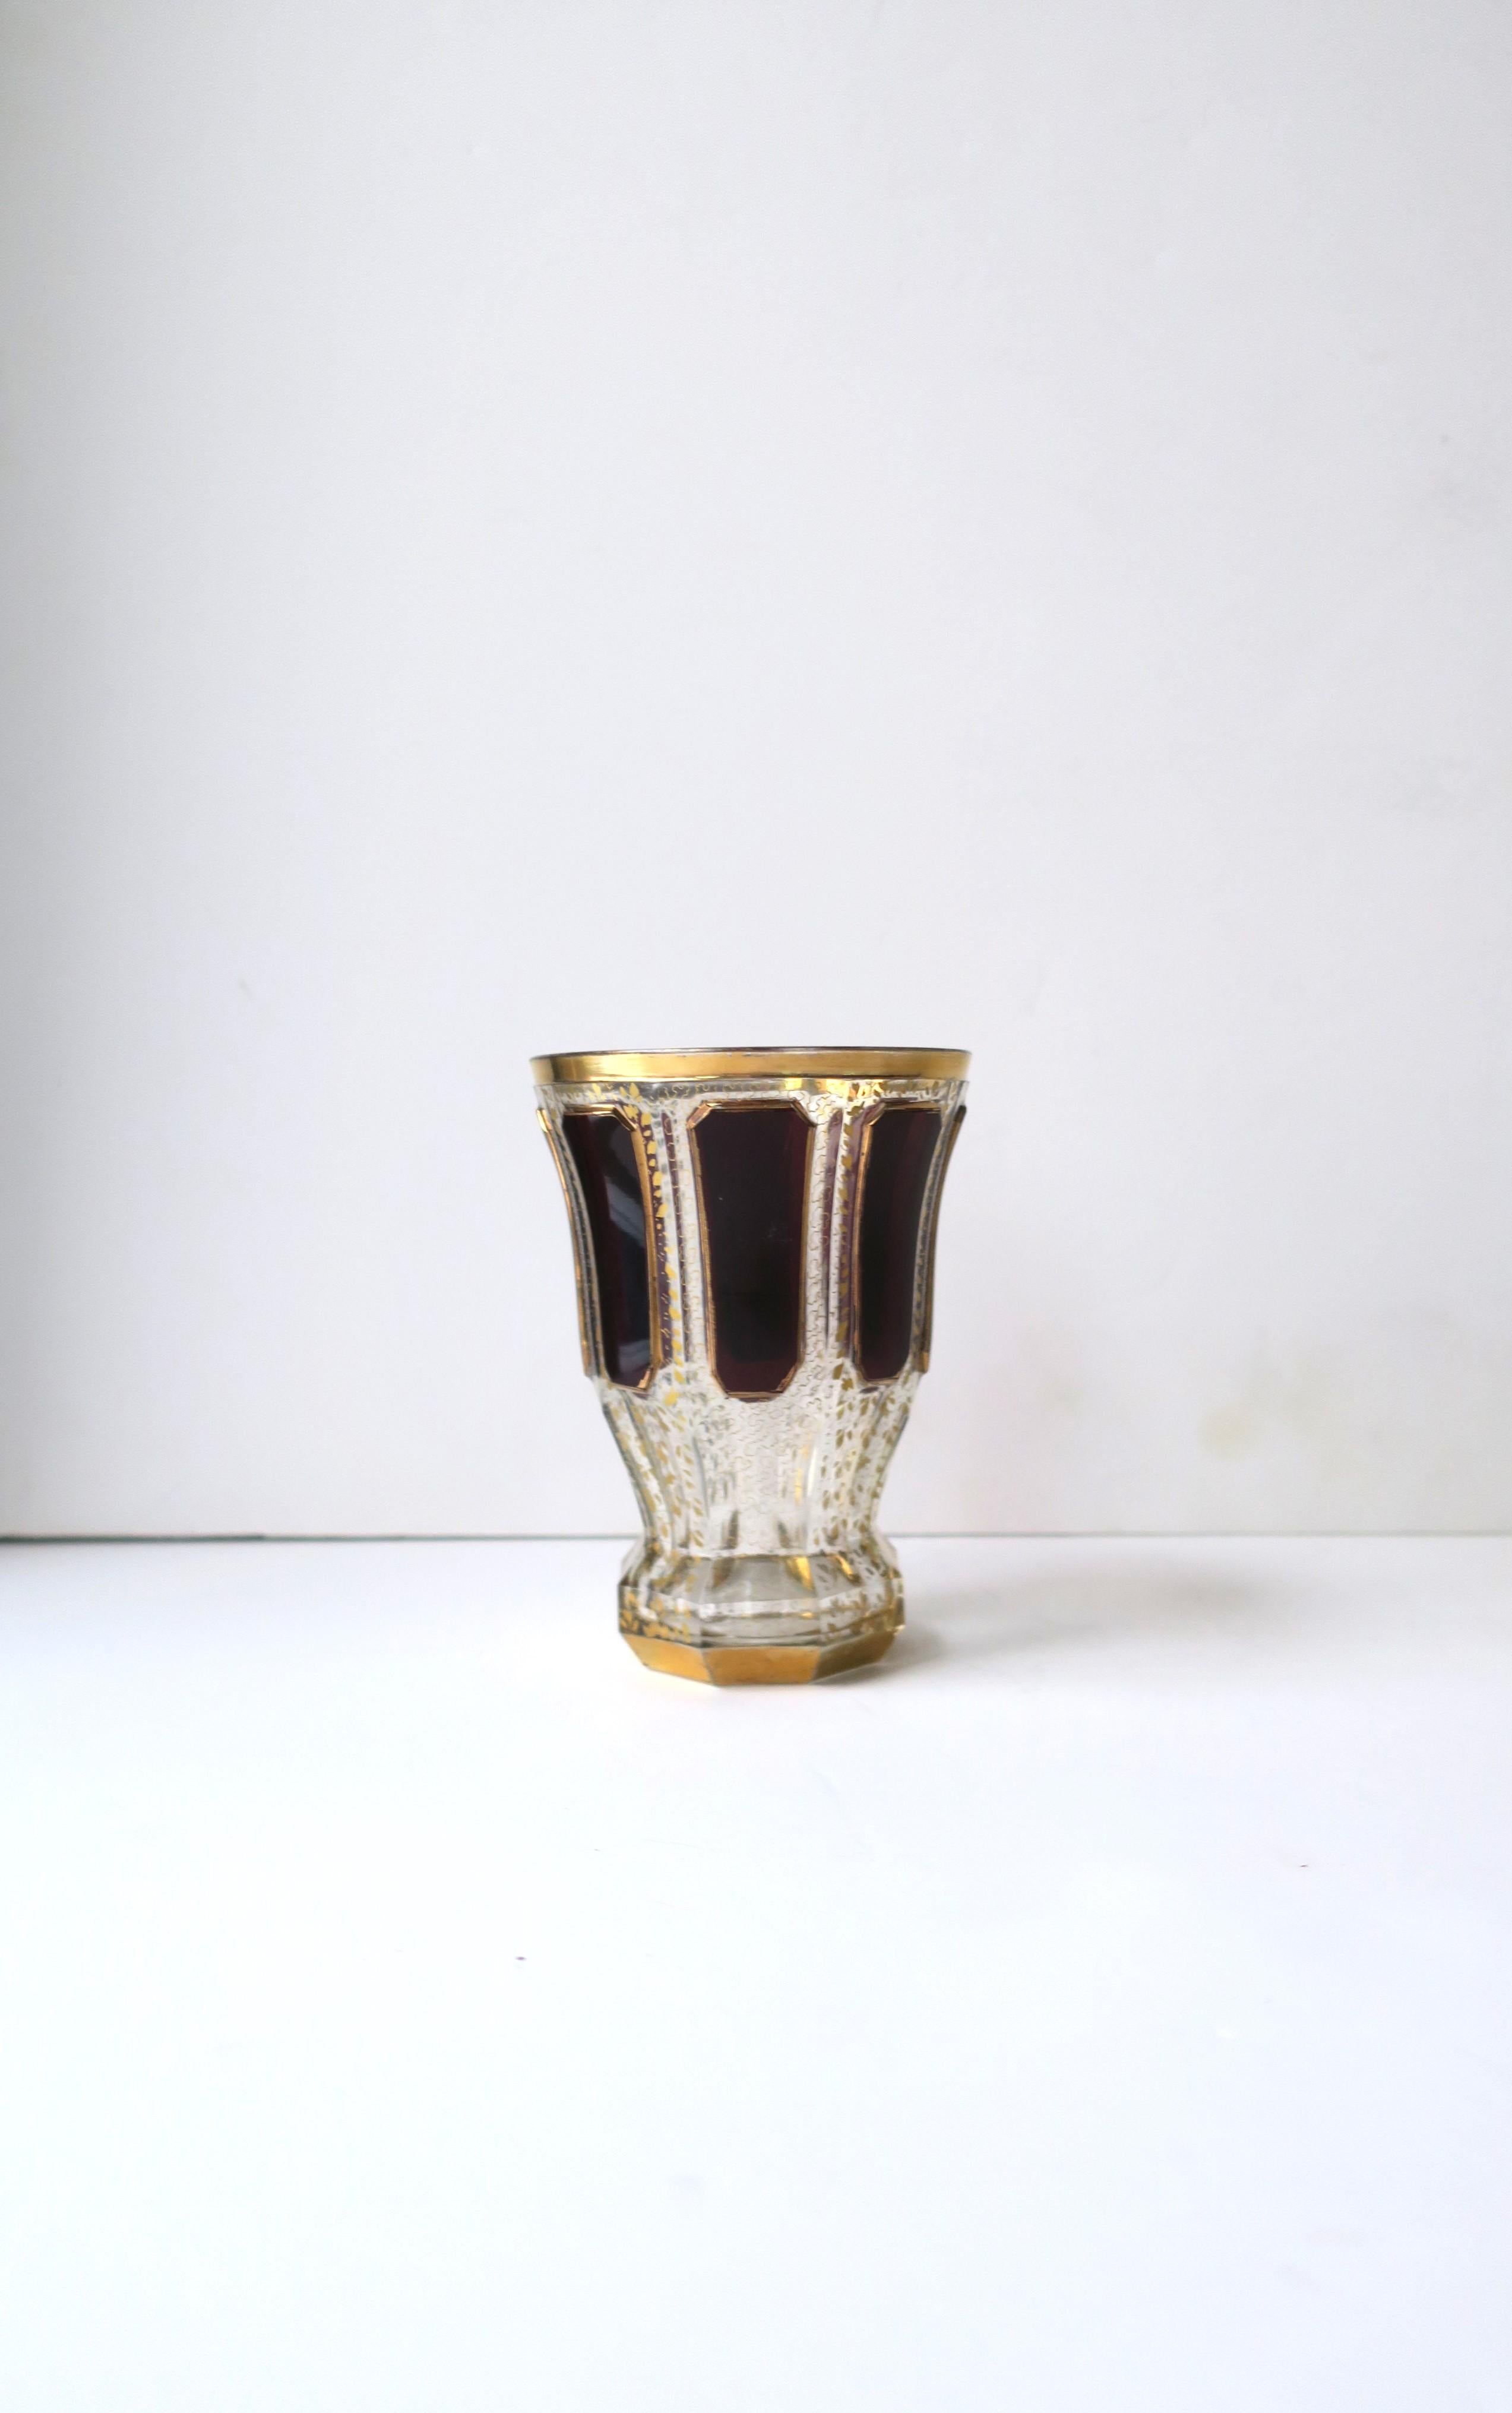 A beautiful Bohemian transparent/clear, red burgundy and gold gilt glass vase or beaker vessel, circa late-19th century, Czechoslovakia. Vessel is attributed to luxury crystal glass maker, Moser. Piece has beautiful details from top to bottom, in